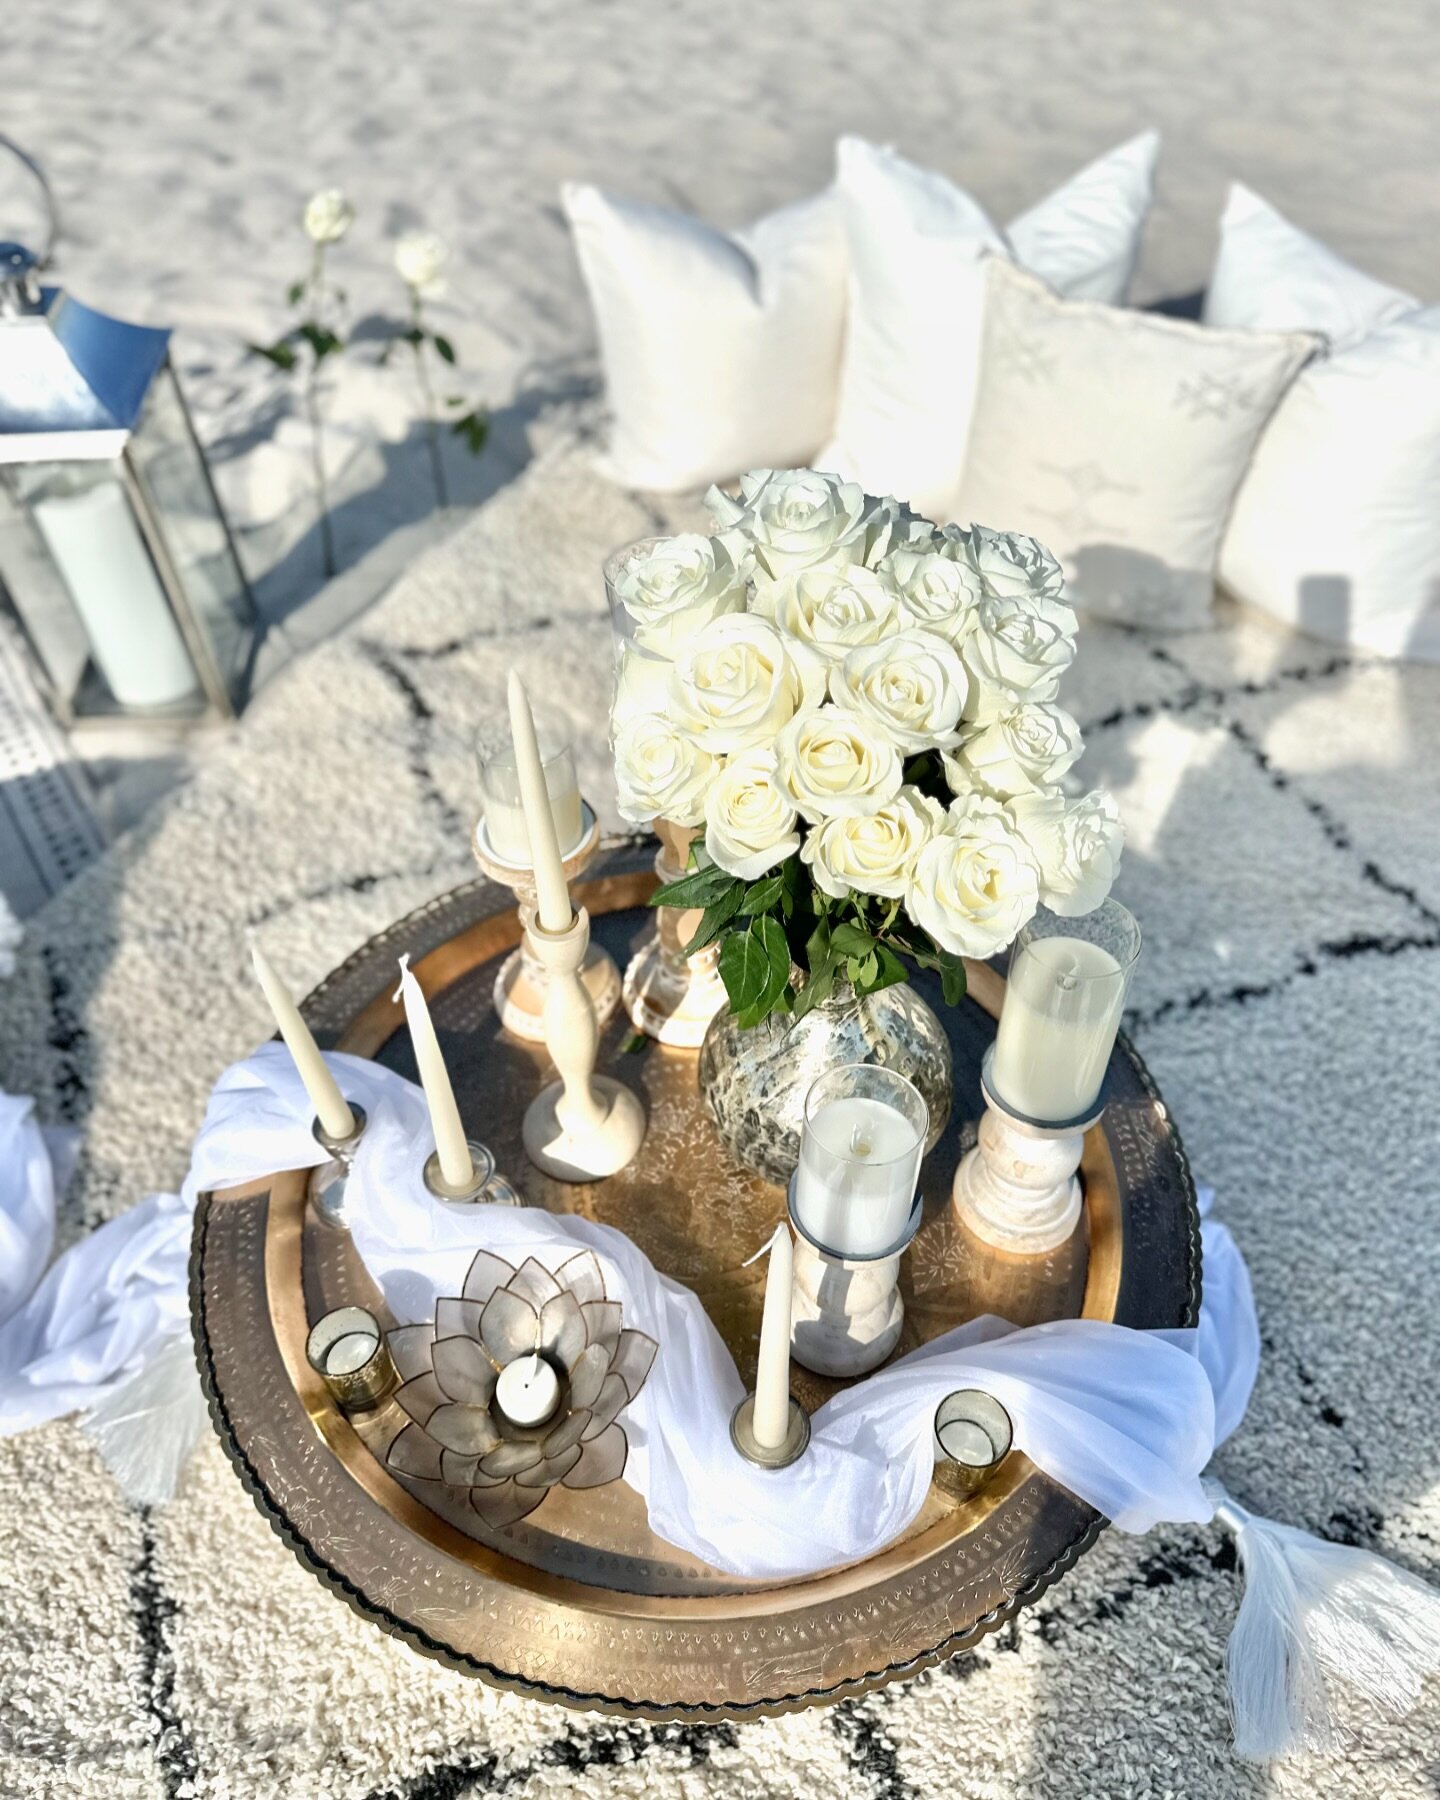 Happy Monday! The love continued this weekend in South Beach with a custom setup for the most romantic couple and their dearest friends:) We were so honored to be entrusted with this special moment, especially in light of a busy spring break Friday;)